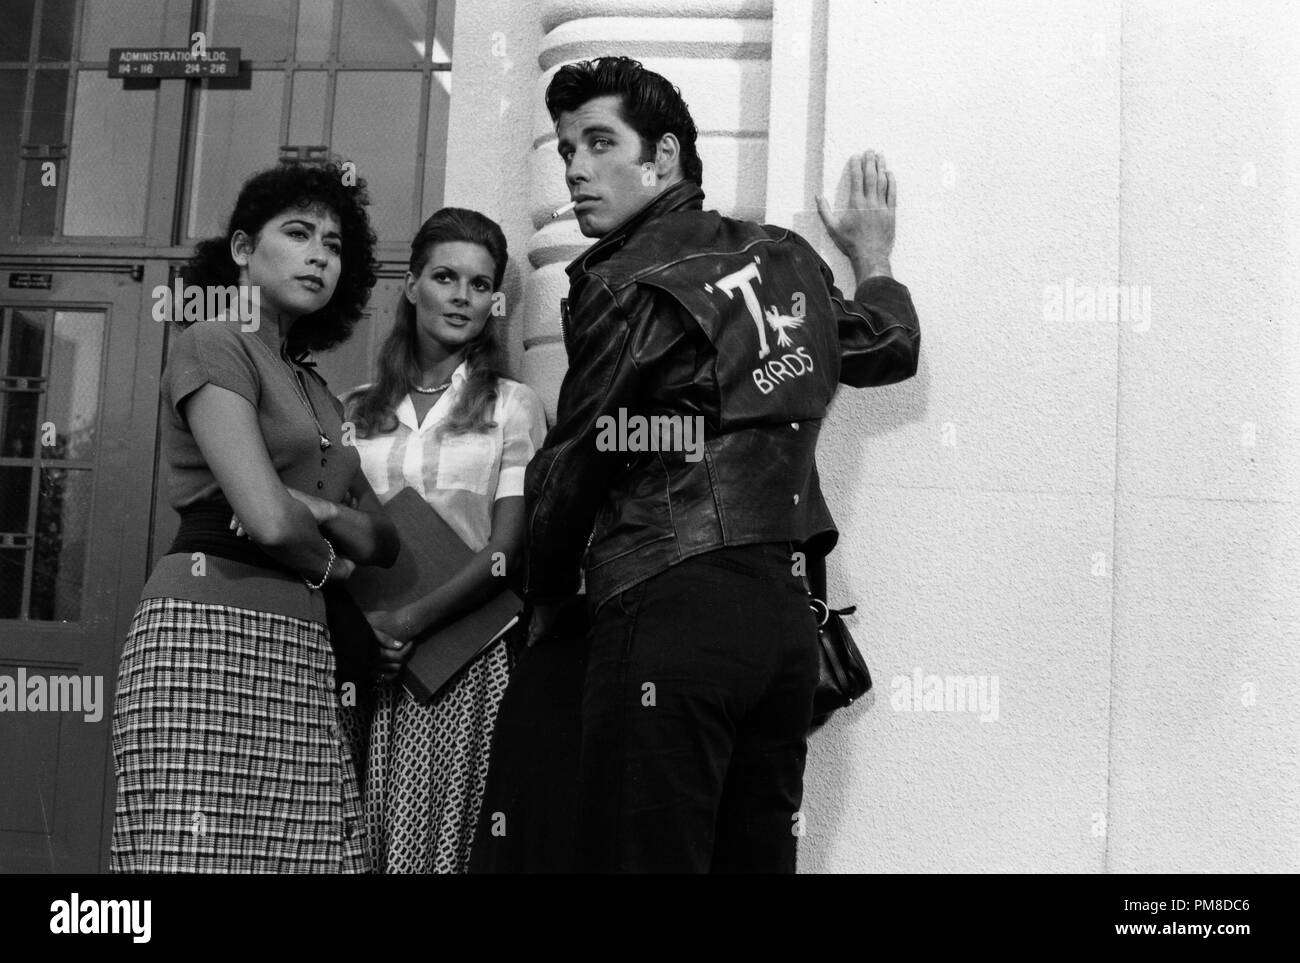 Studio released publicity film still from 'Grease' John Travolta 1978 Paramount Pictures     File Reference # 31955 468THA Stock Photo